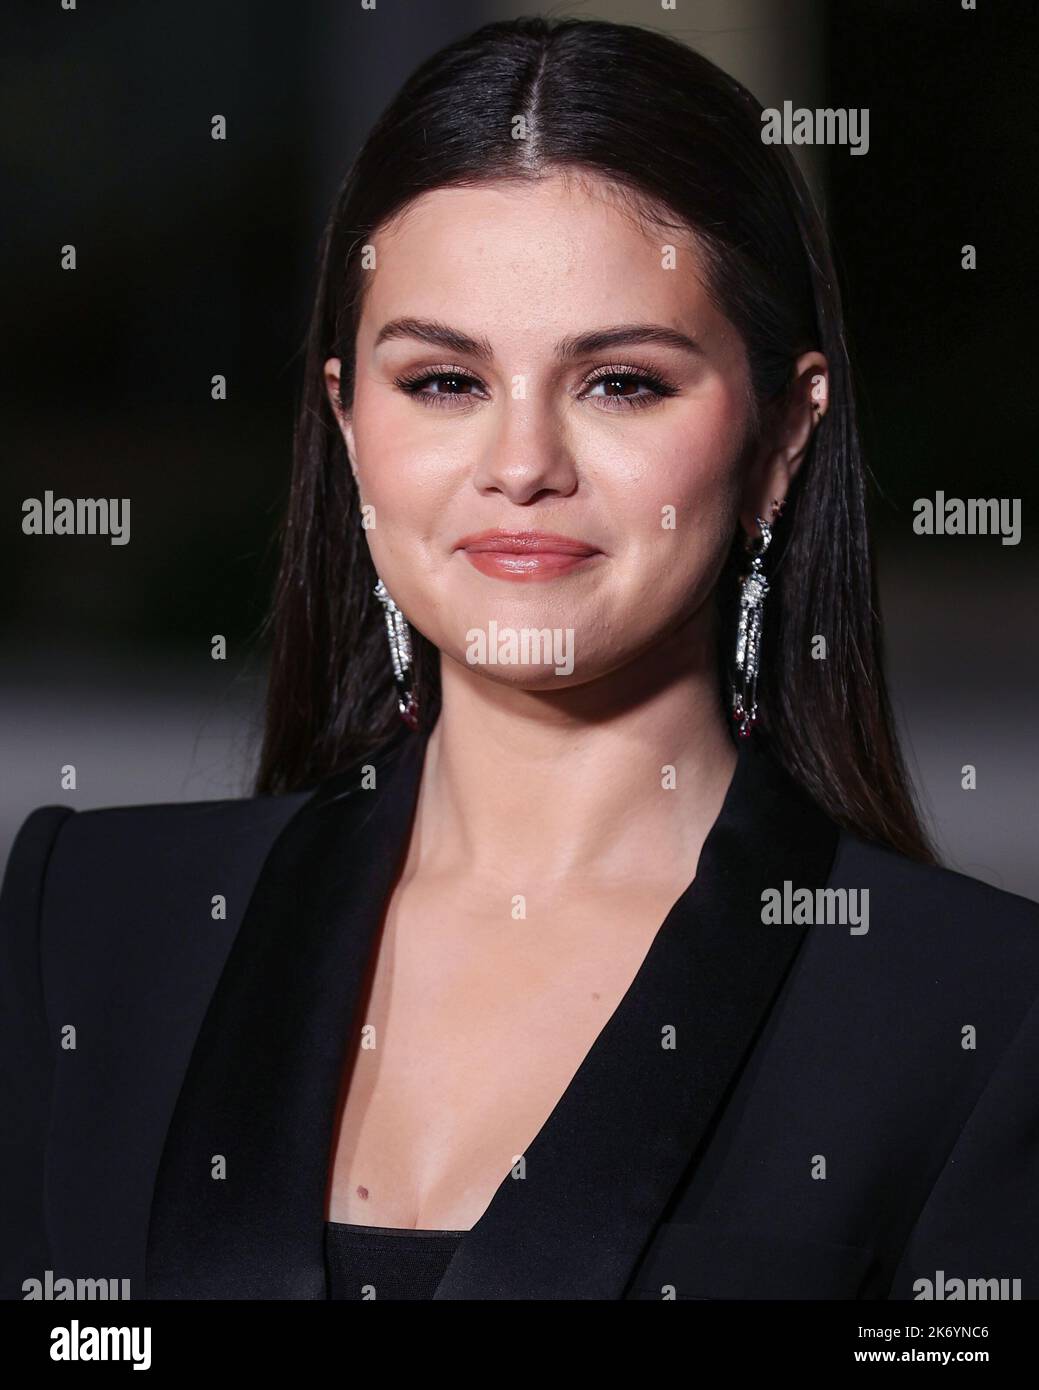 Los Angeles, United States. 15th Oct, 2022. LOS ANGELES, CALIFORNIA, USA - OCTOBER 15: Selena Gomez arrives at the 2nd Annual Academy Museum of Motion Pictures Gala presented by Rolex held at the Academy Museum of Motion Pictures on October 15, 2022 in Los Angeles, California, United States. (Photo by Xavier Collin/Image Press Agency) Credit: Image Press Agency/Alamy Live News Stock Photo